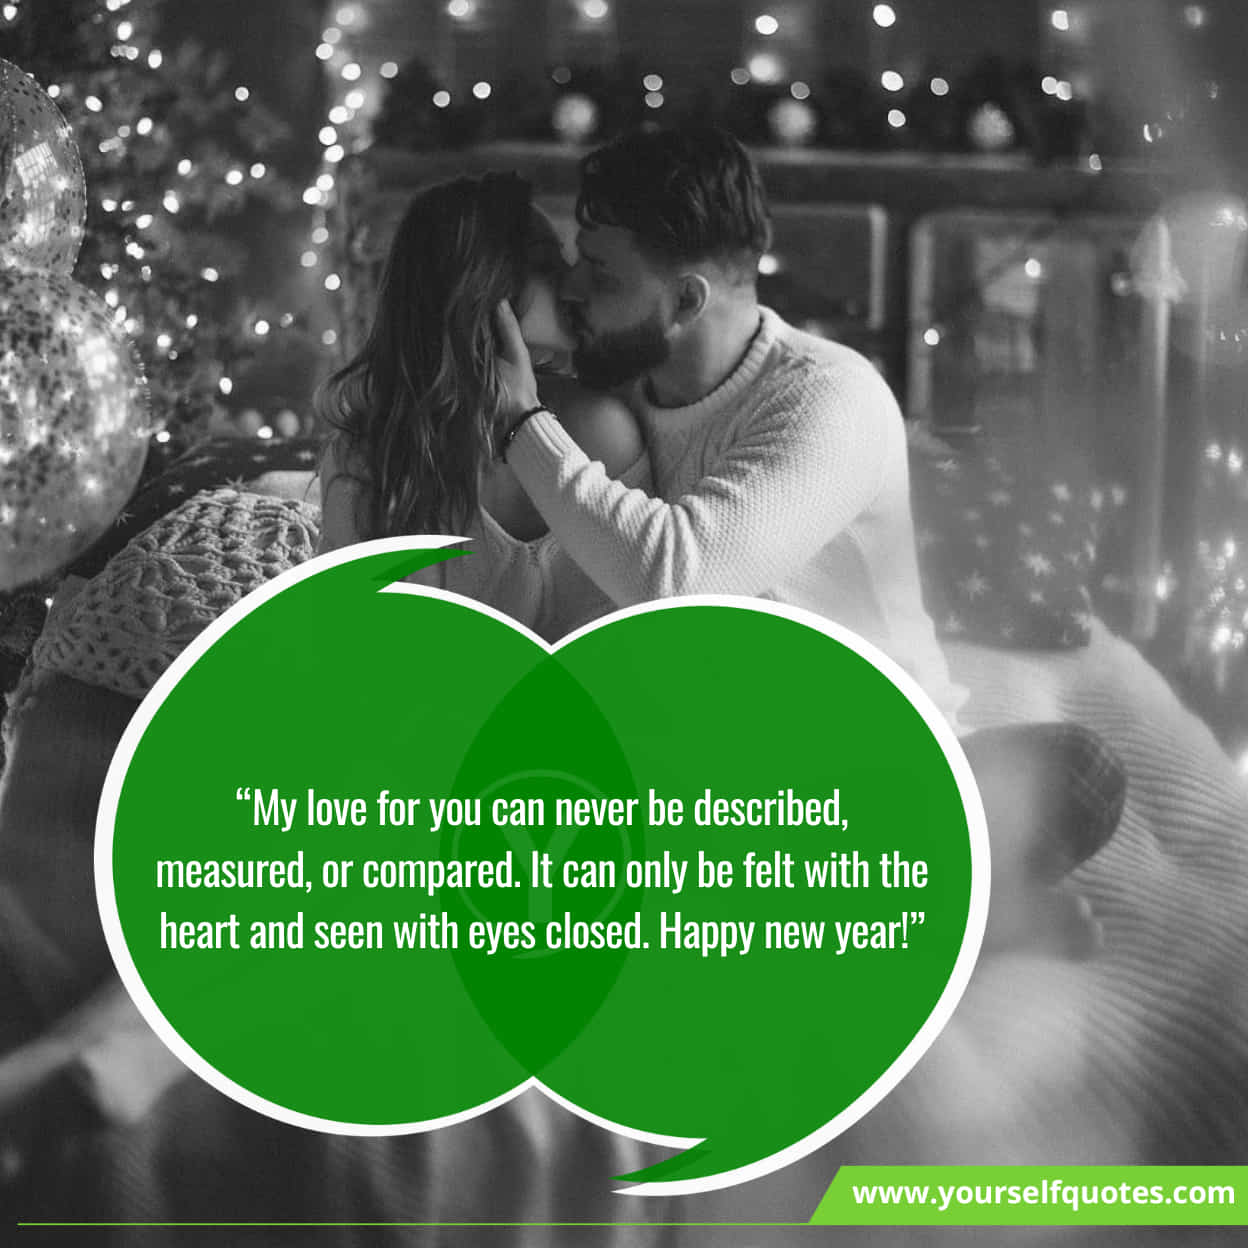 Lovely Romantic New Year Wishes